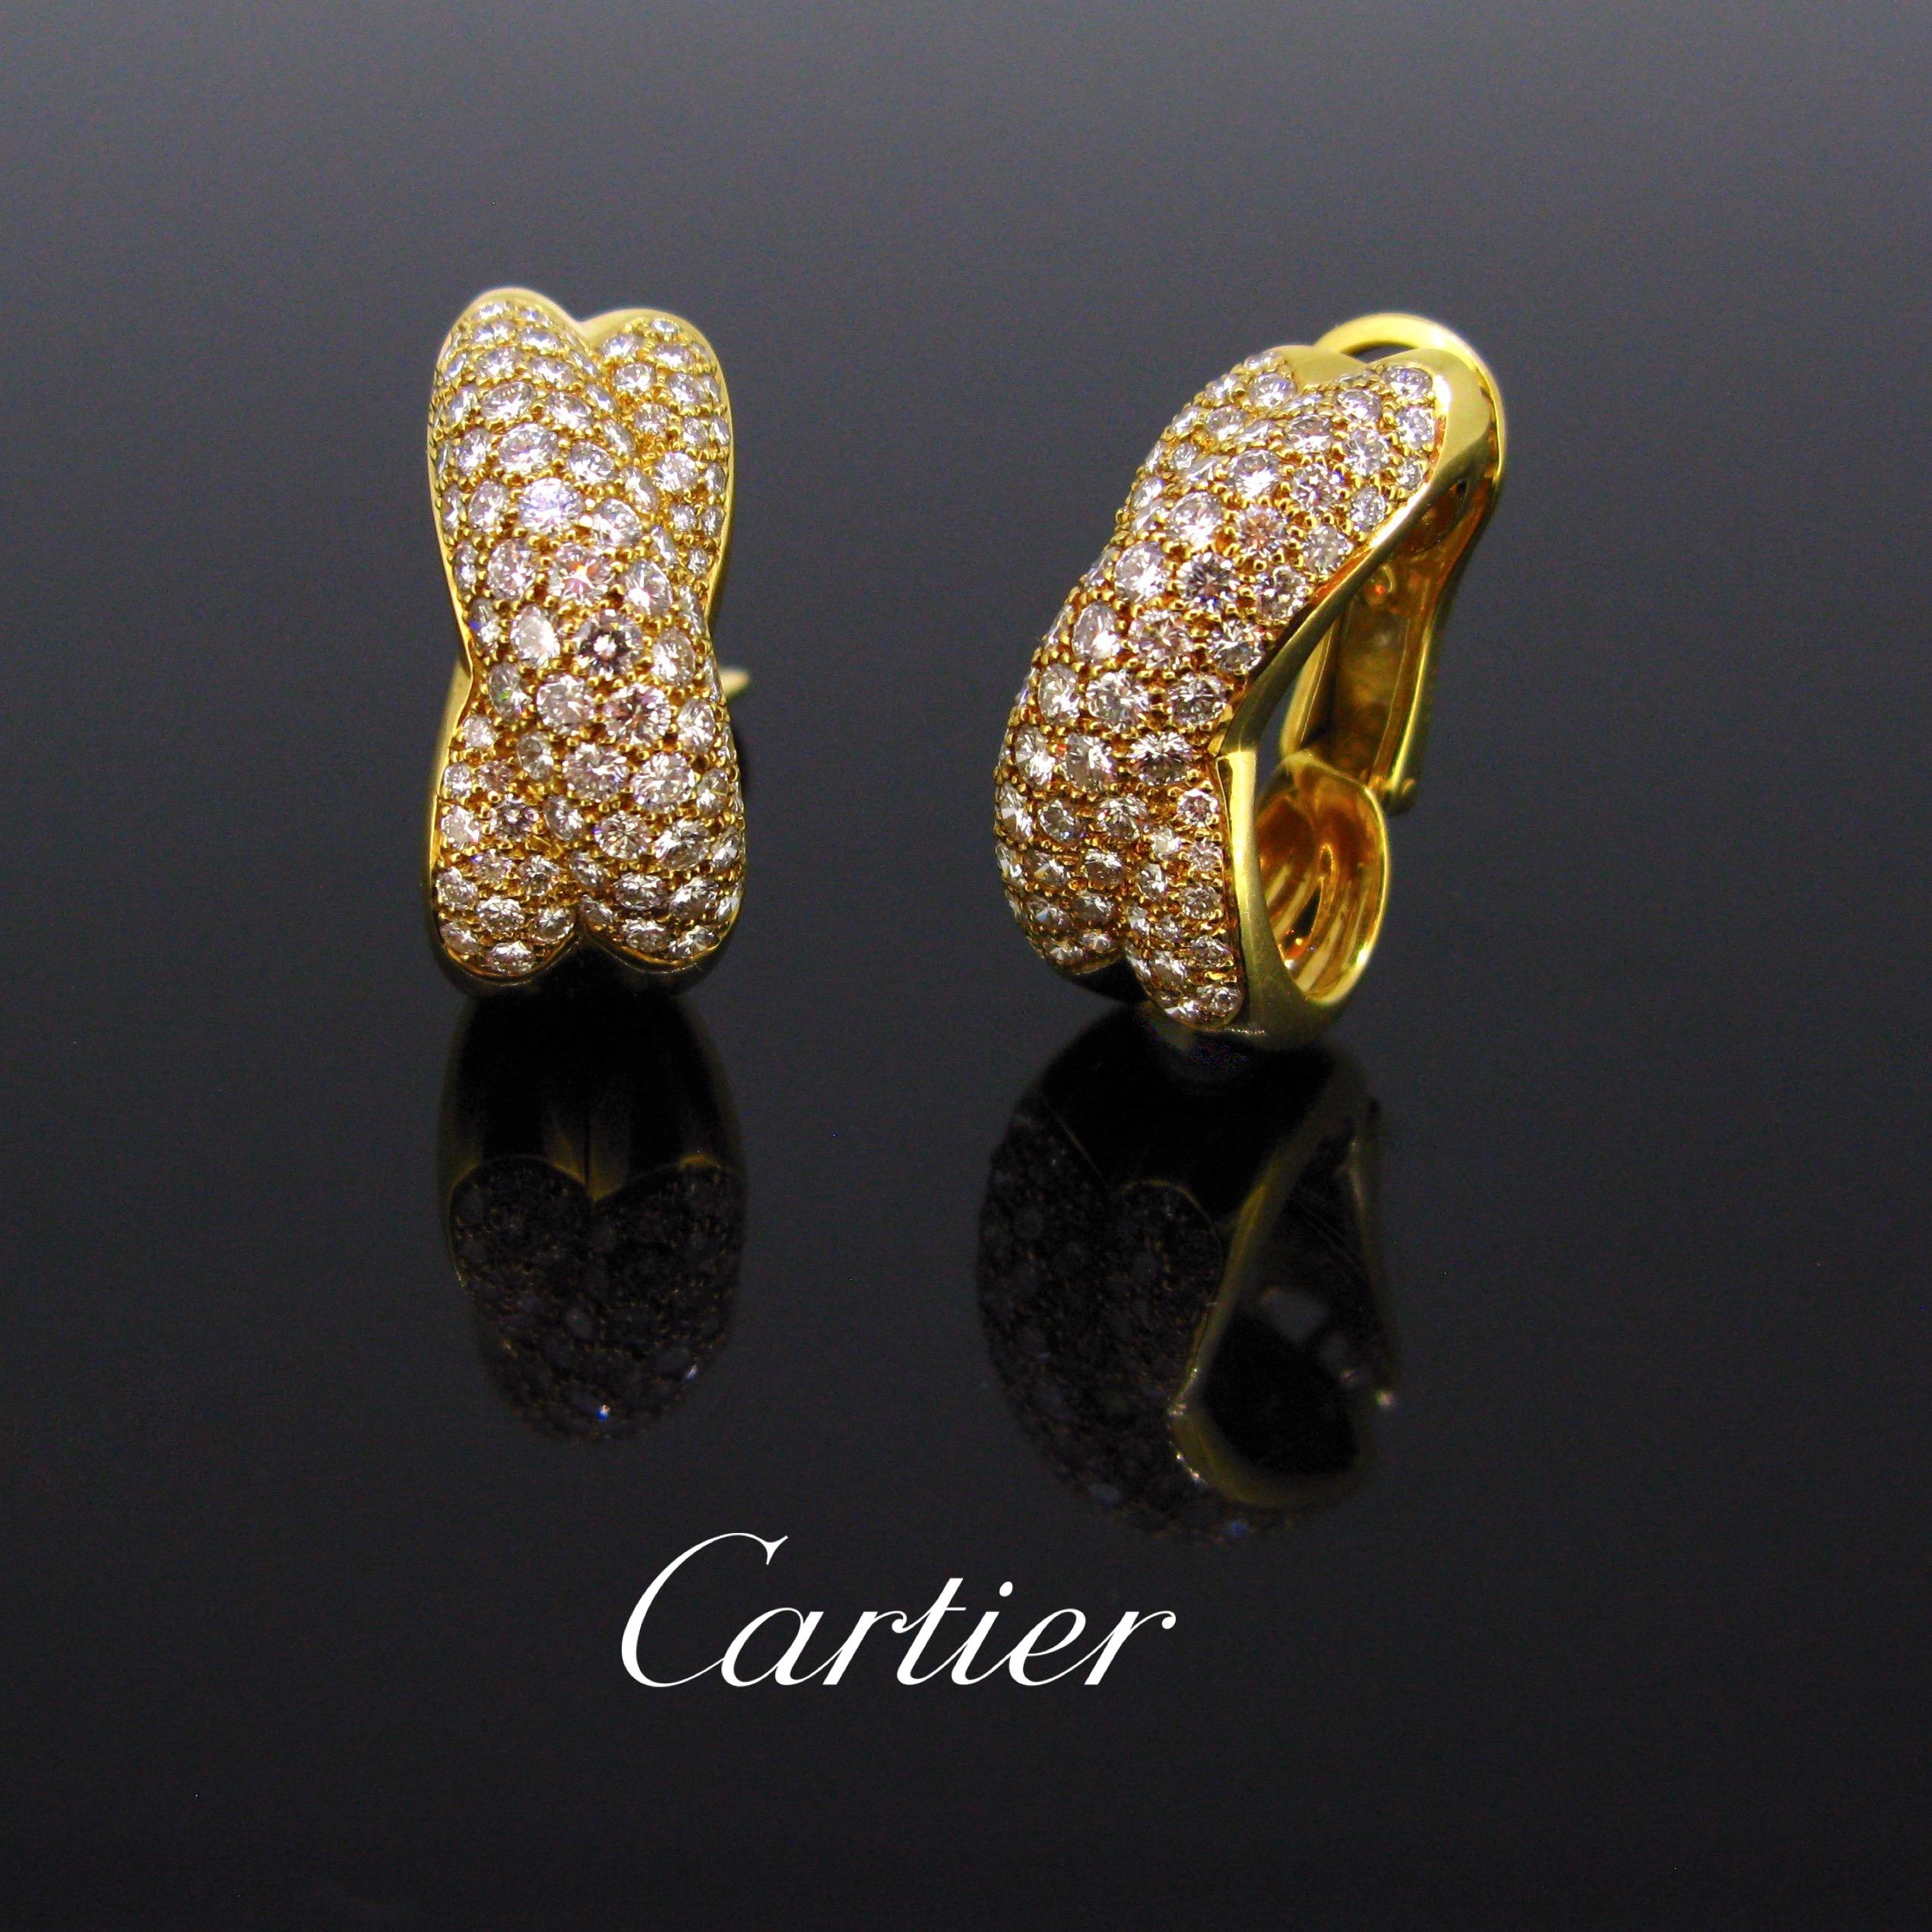 These Cartier earrings are fully made in 18kt yellow gold. Each features 85 lively and sparkly brilliant cut diamonds. It is signed and numbered on the rim and on the back. The earrings come with their original box. The total diamond carat weight is